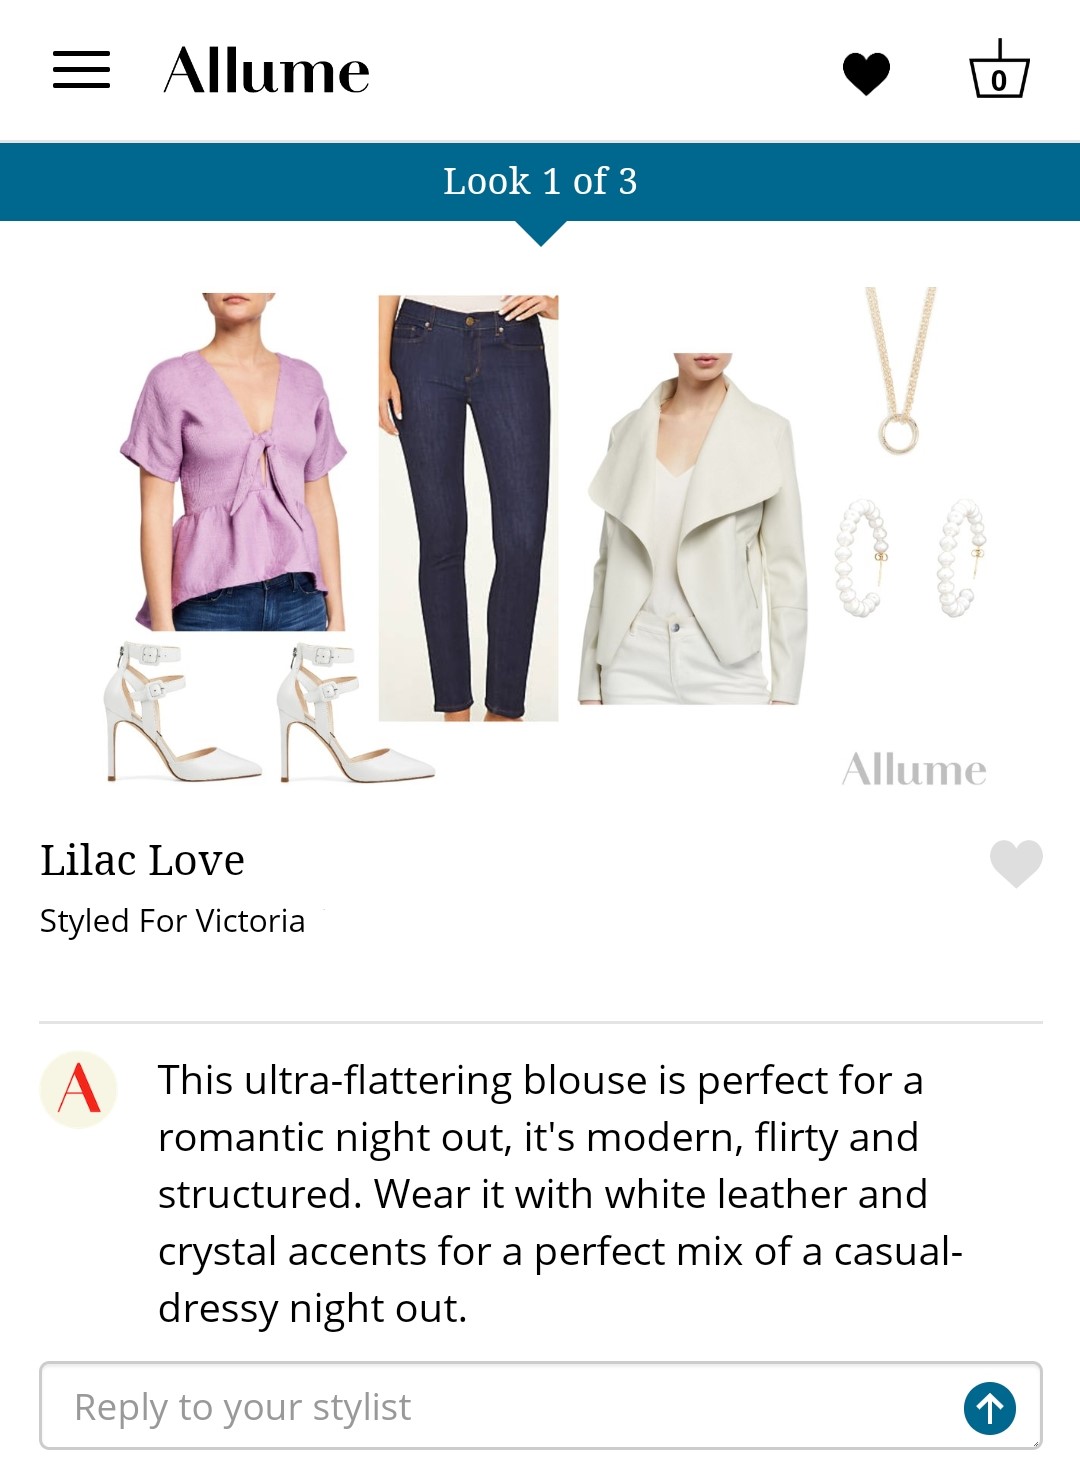 allume review hire a personal stylist online